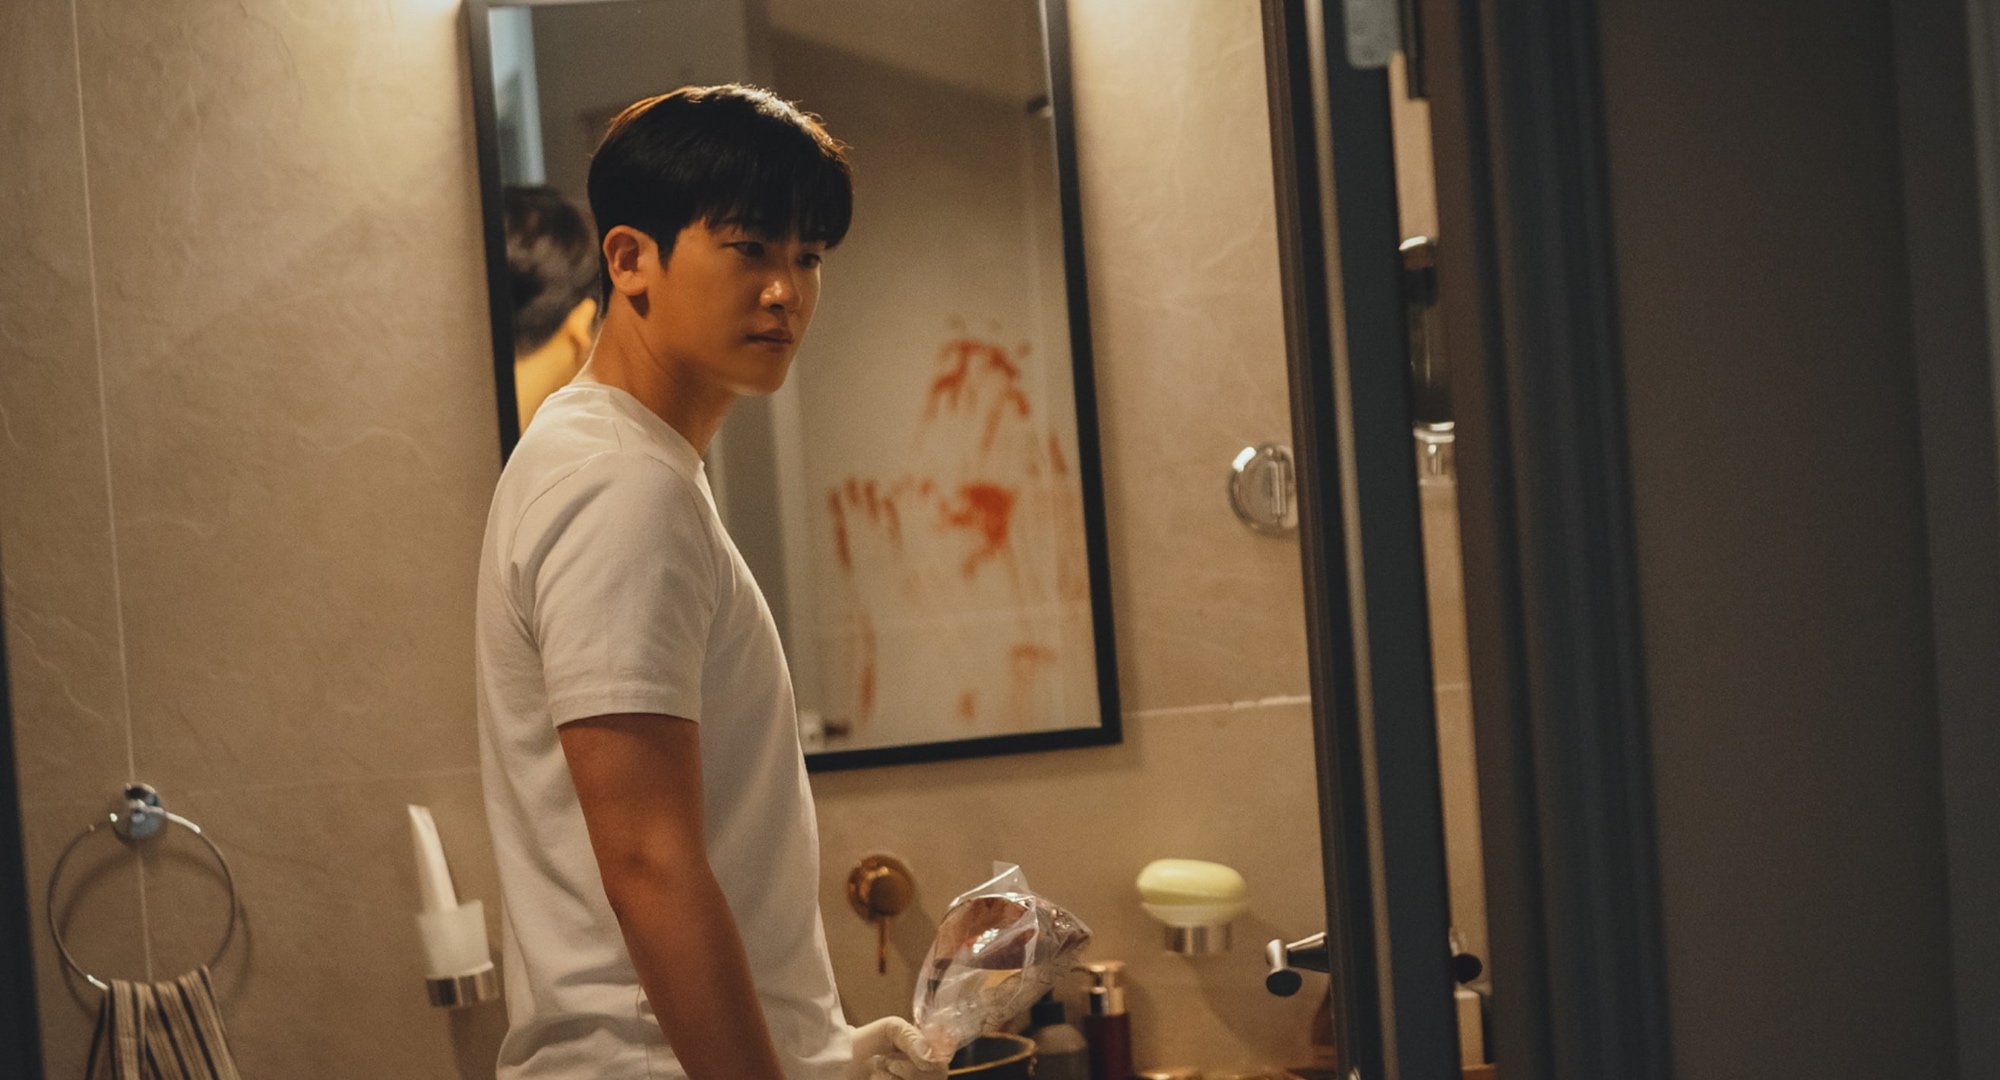 Character Jung Yi-hyun for 'Happiness' episode 3 wearing white shirt in bloody bathroom.